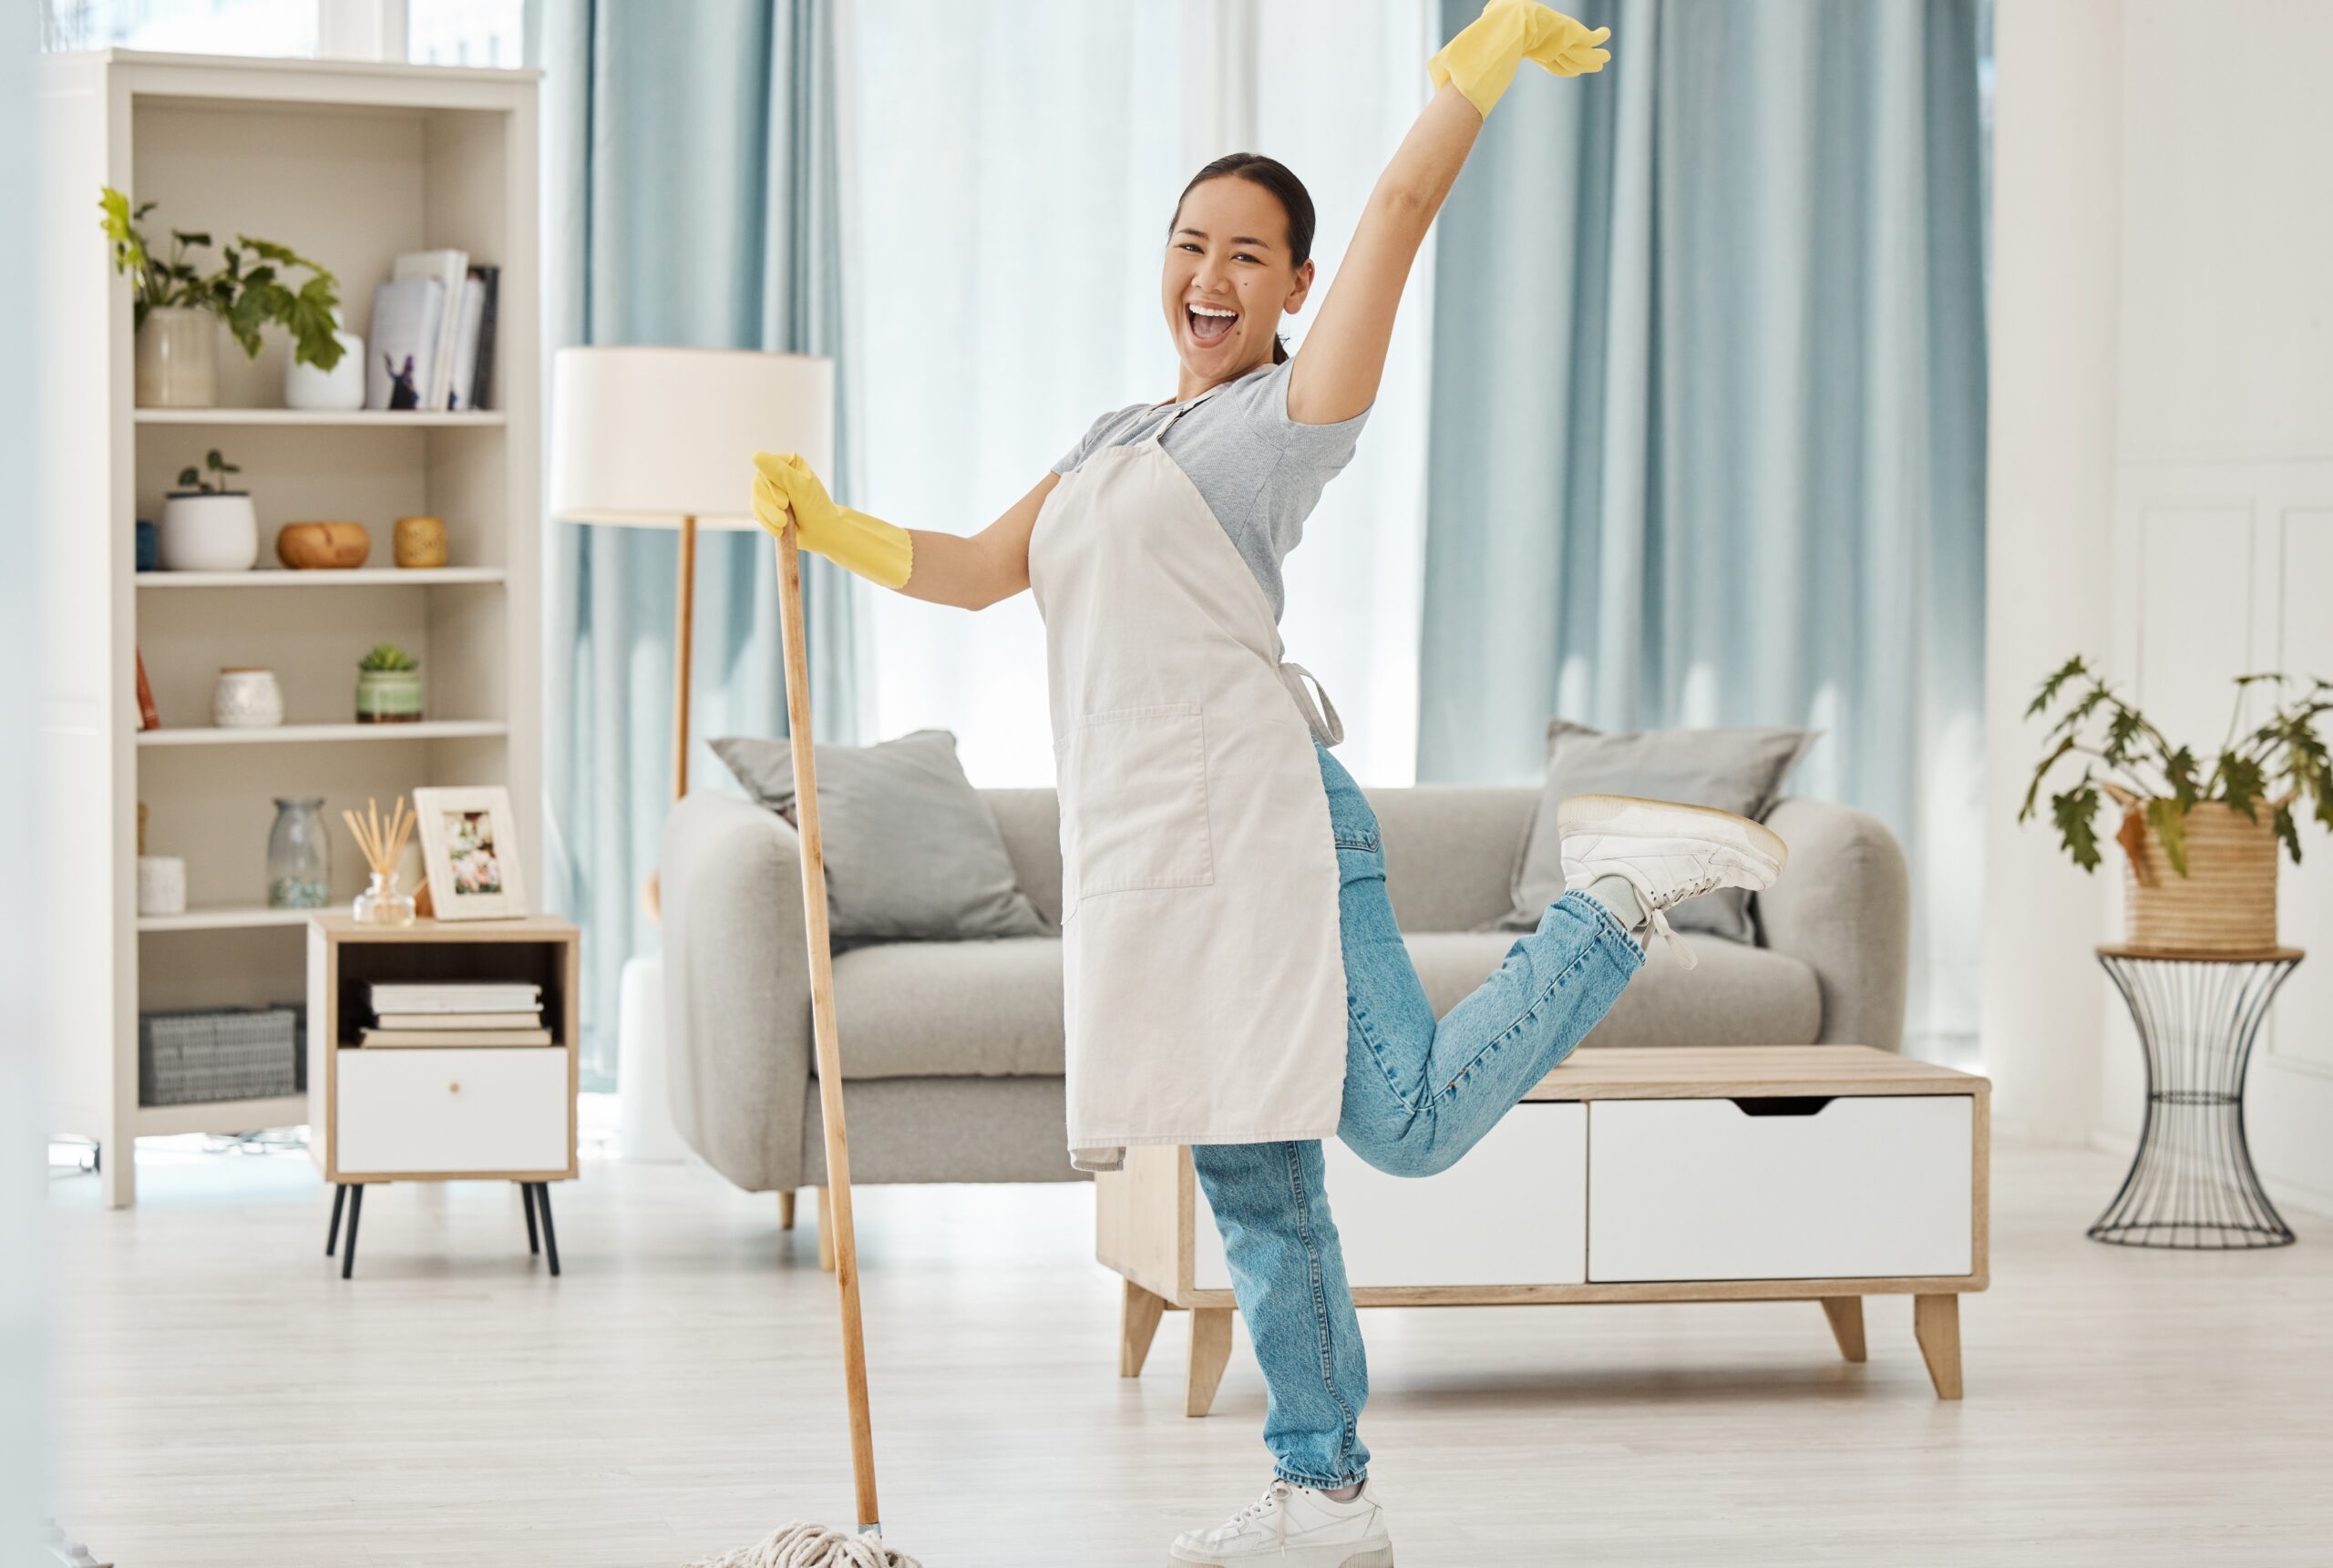 Making Your Maid Happy: 10 Tips for a Positive Relationship